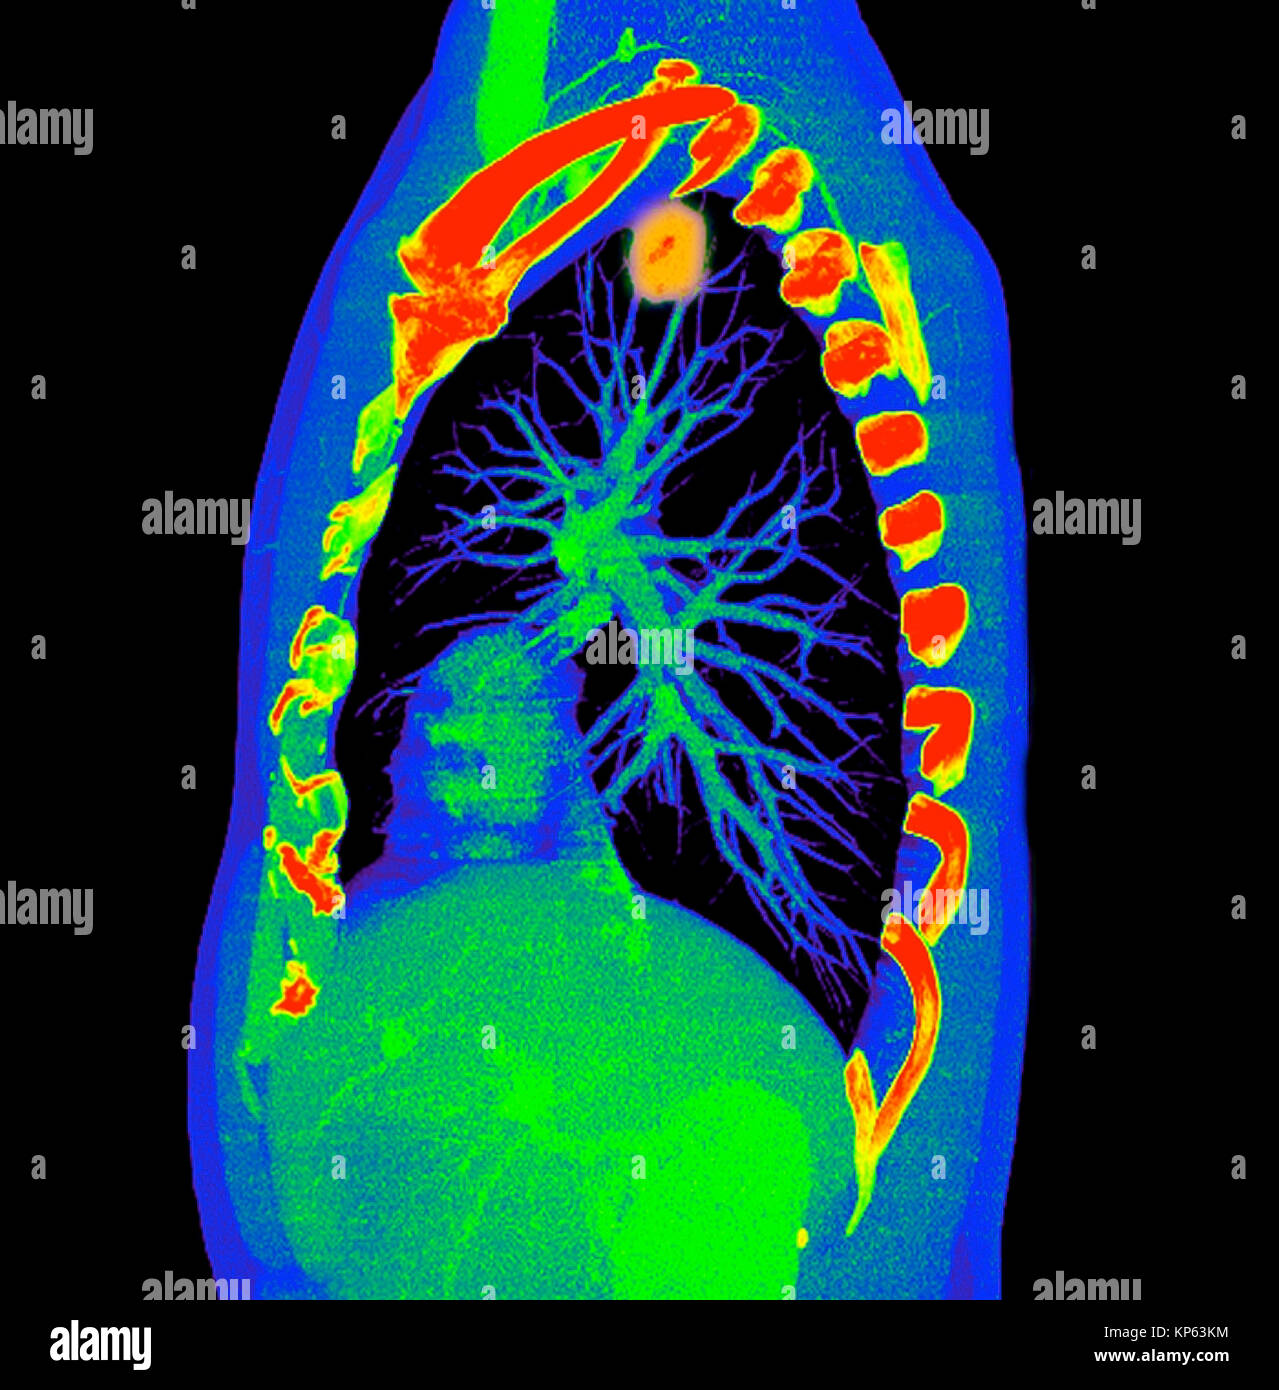 Coloured CTscan of the upper chest showing a tumor in the lung. Stock Photo